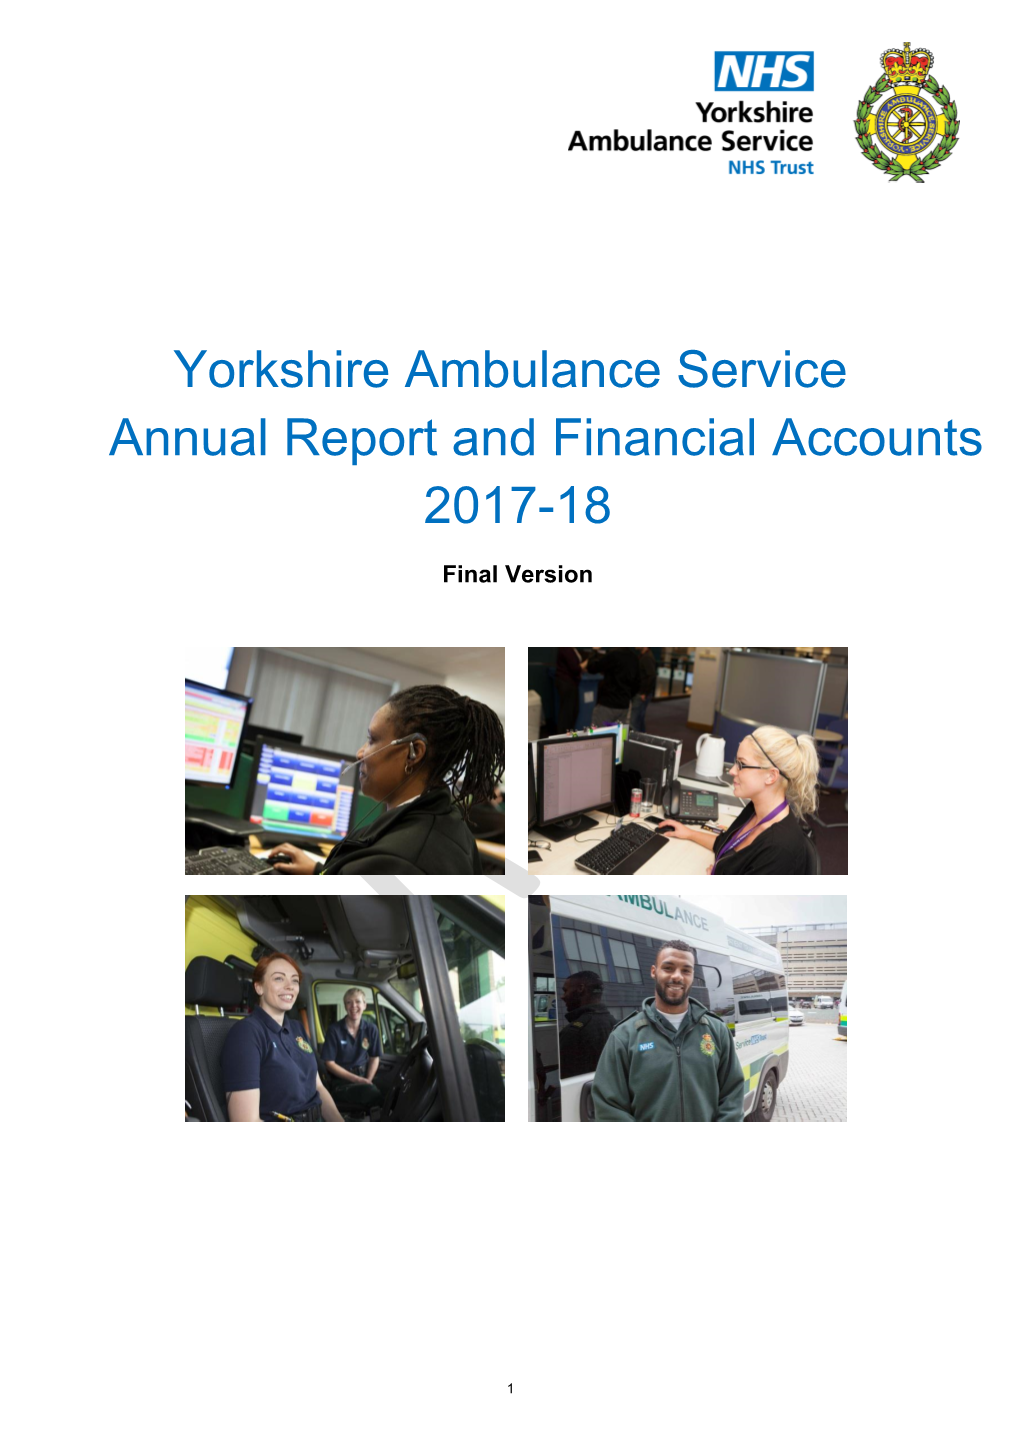 Yorkshire Ambulance Service Annual Report and Financial Accounts 2017-18